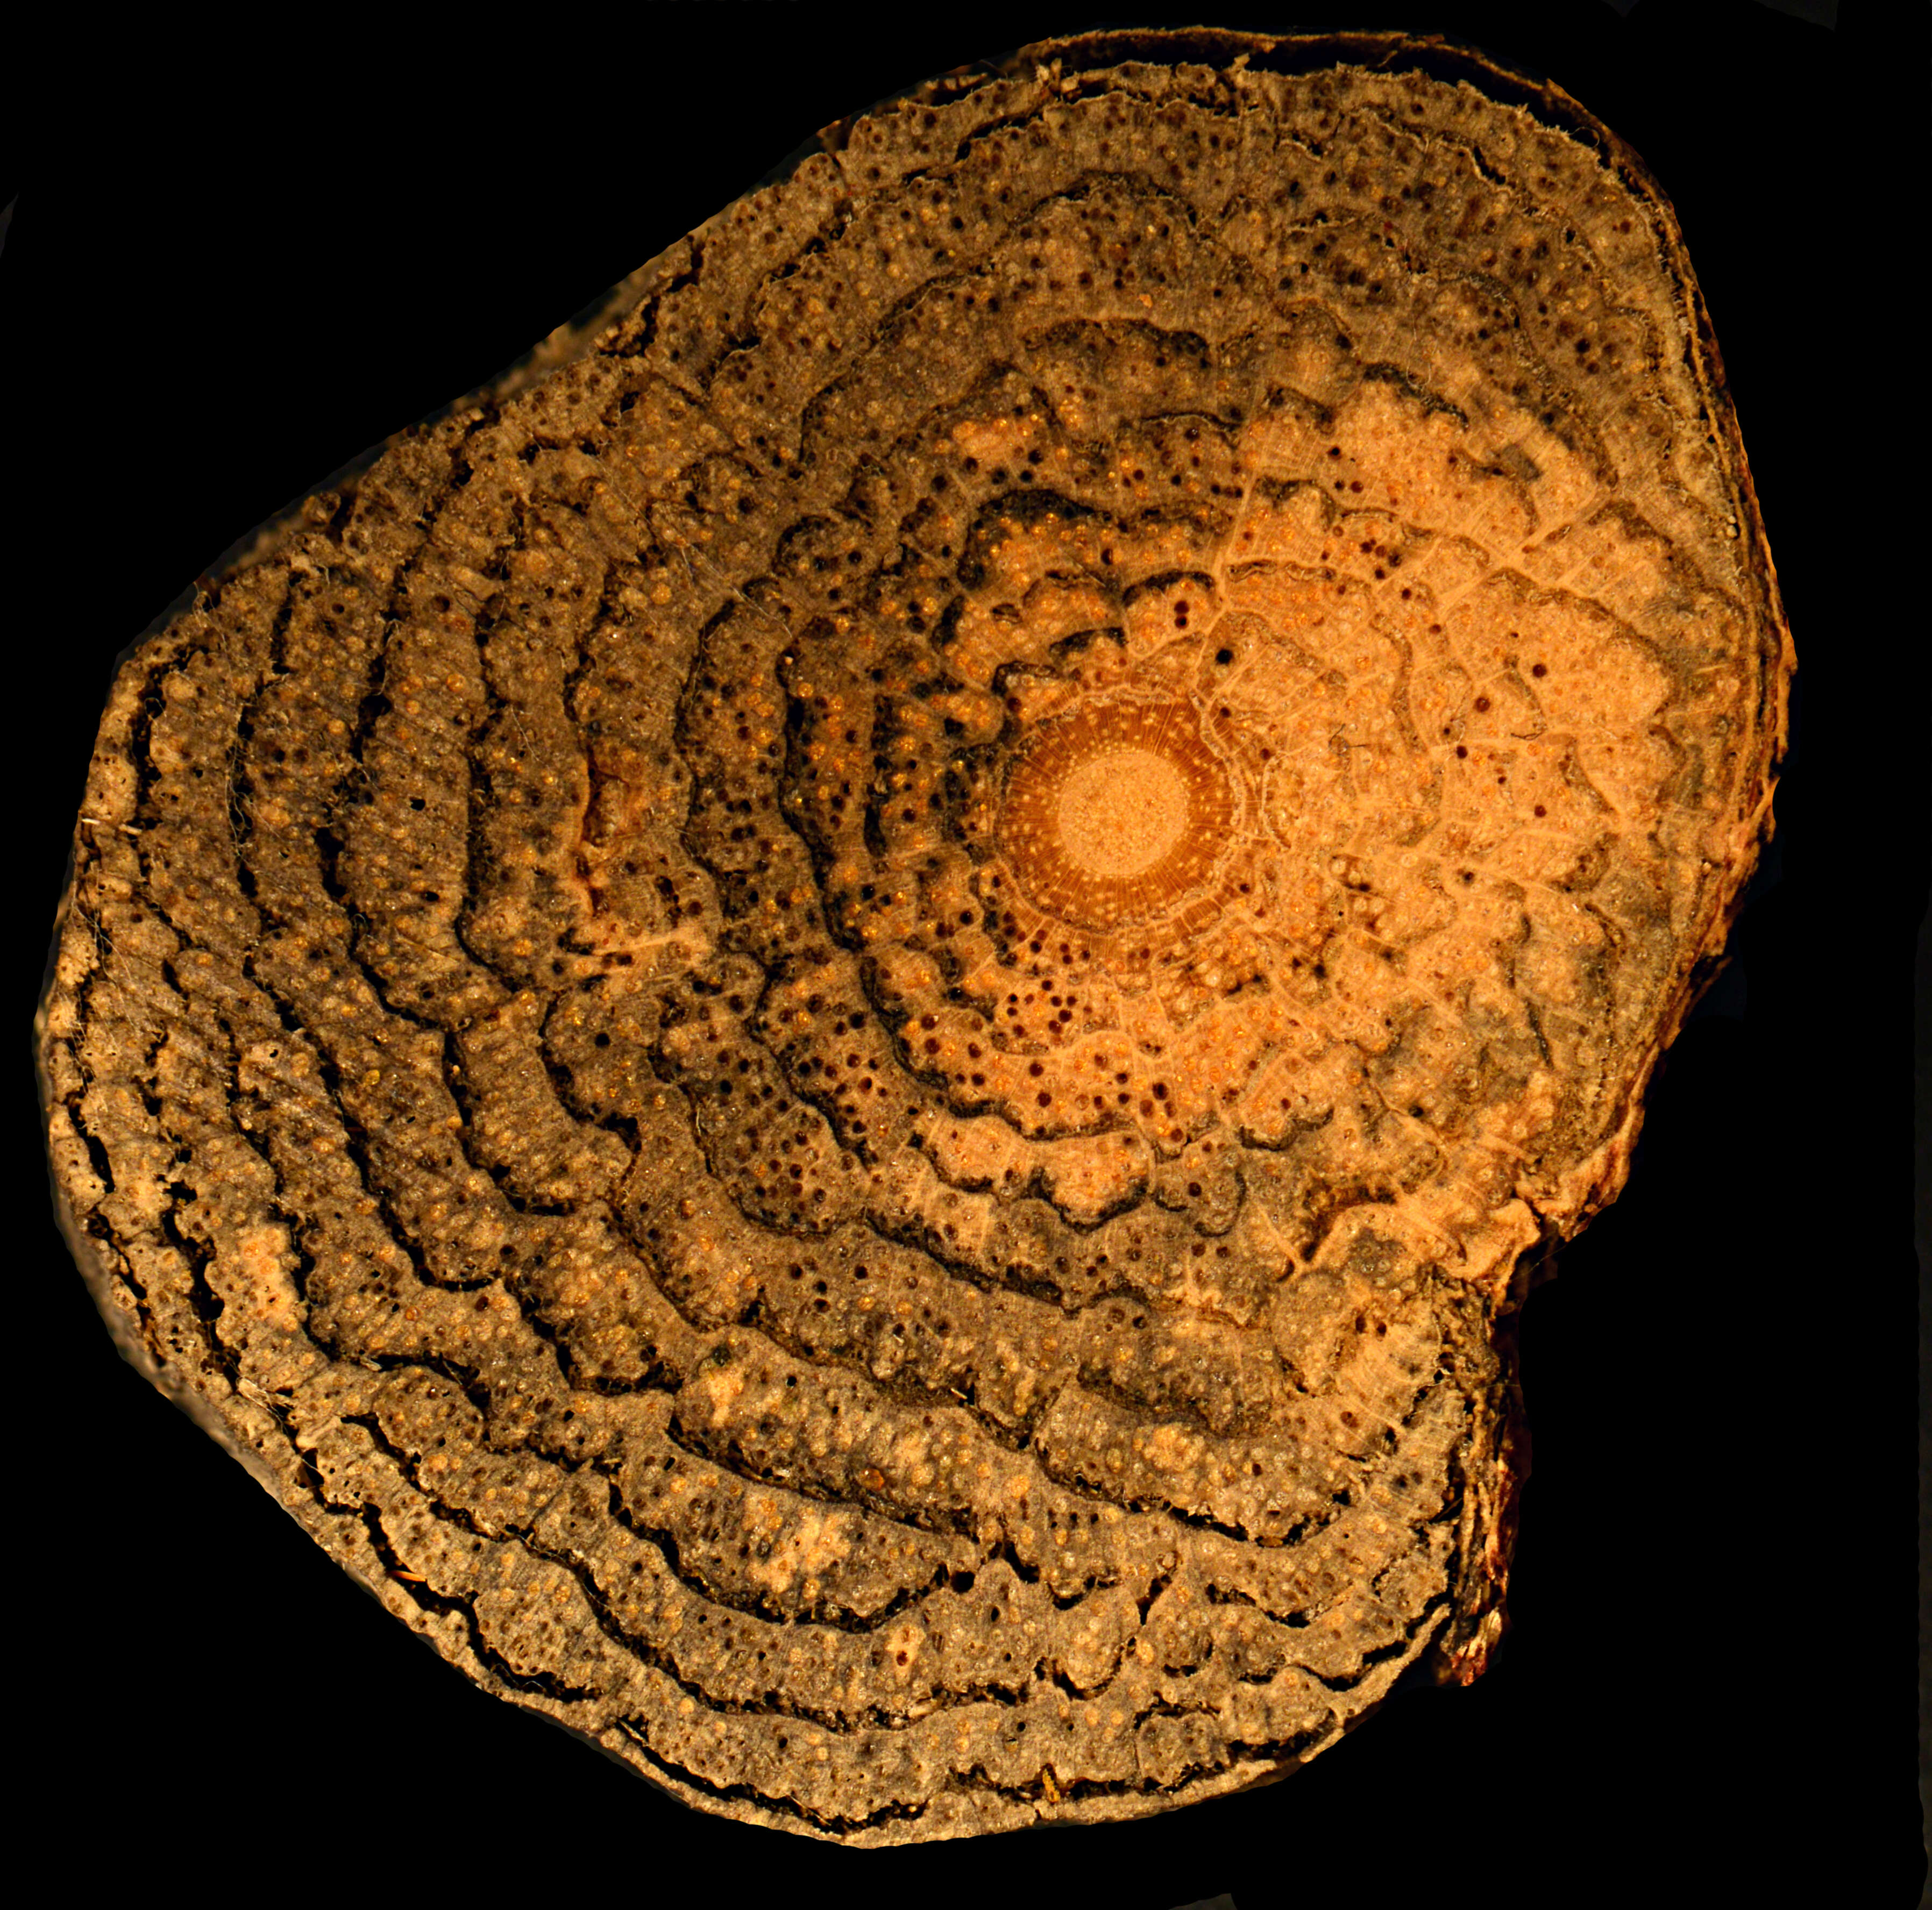 Image of Moutabea guianensis Aubl.